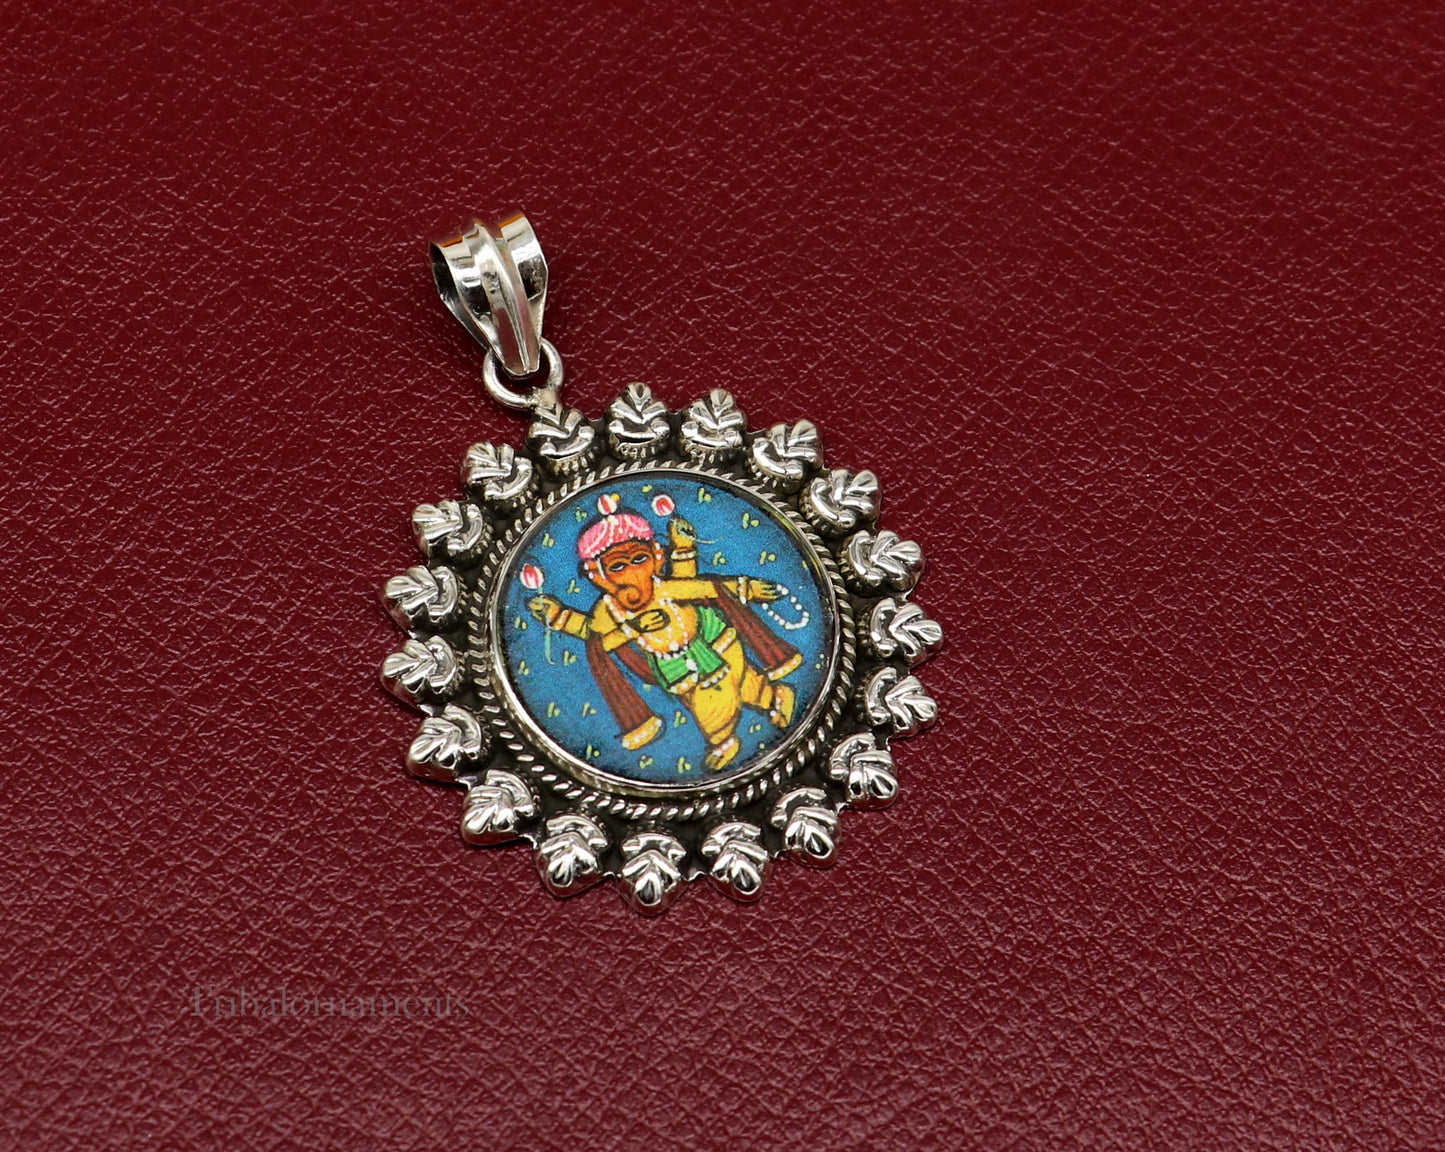 92.5 Sterling Silver Lord Ganesh Pendant Hand Painted Miniature Art Painting photo with Glass Framed Pendant ethnic stylish jewelry ssp812 - TRIBAL ORNAMENTS